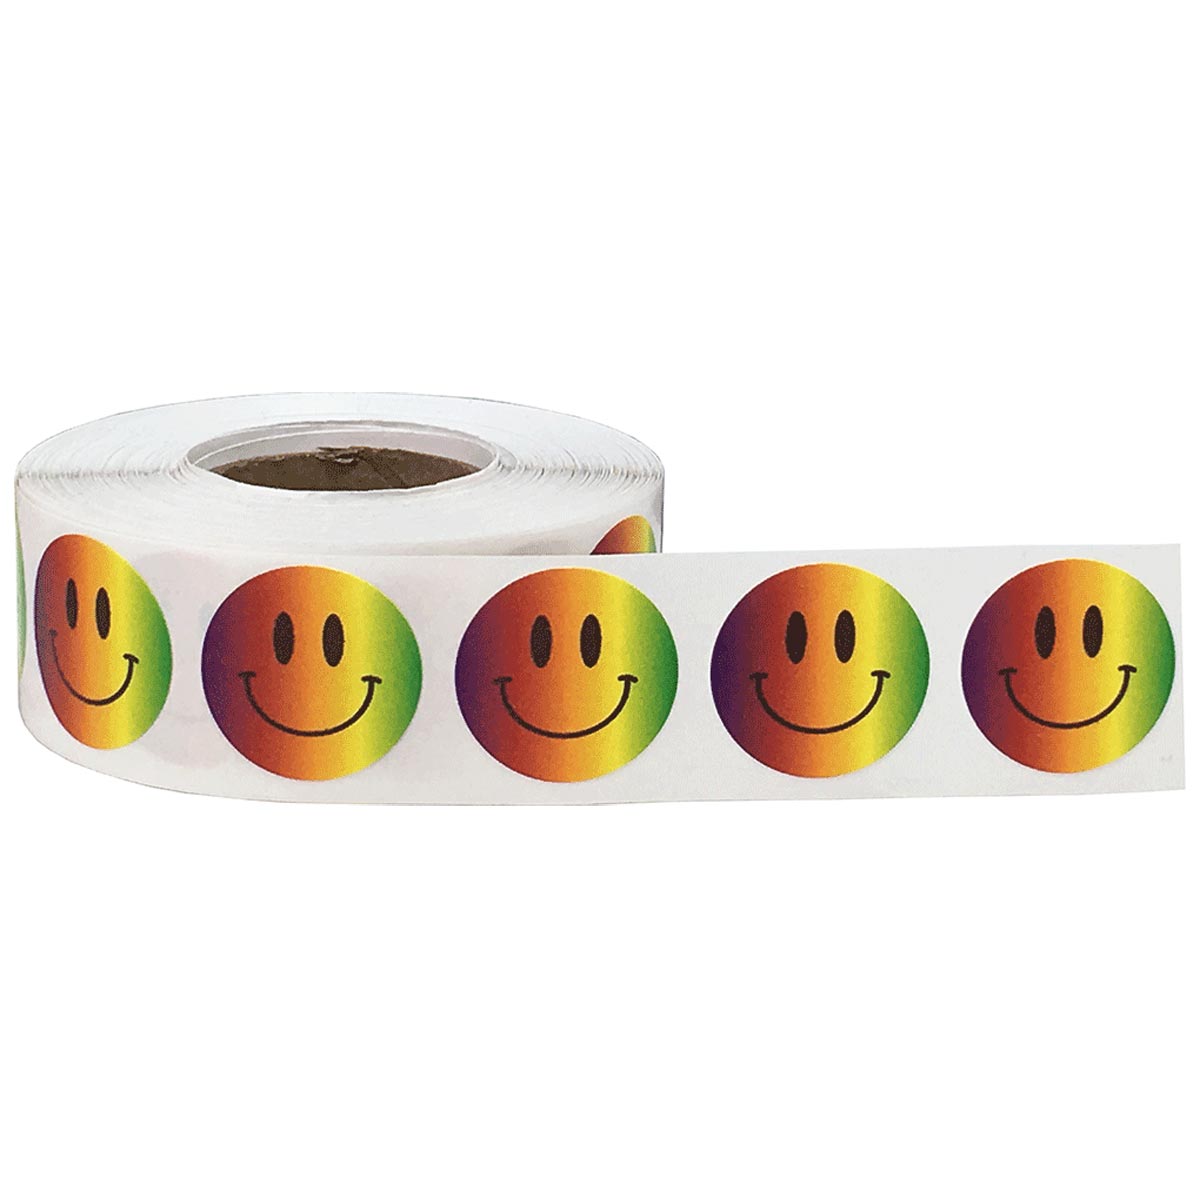 Yellow Smiley Face Stickers 3/4